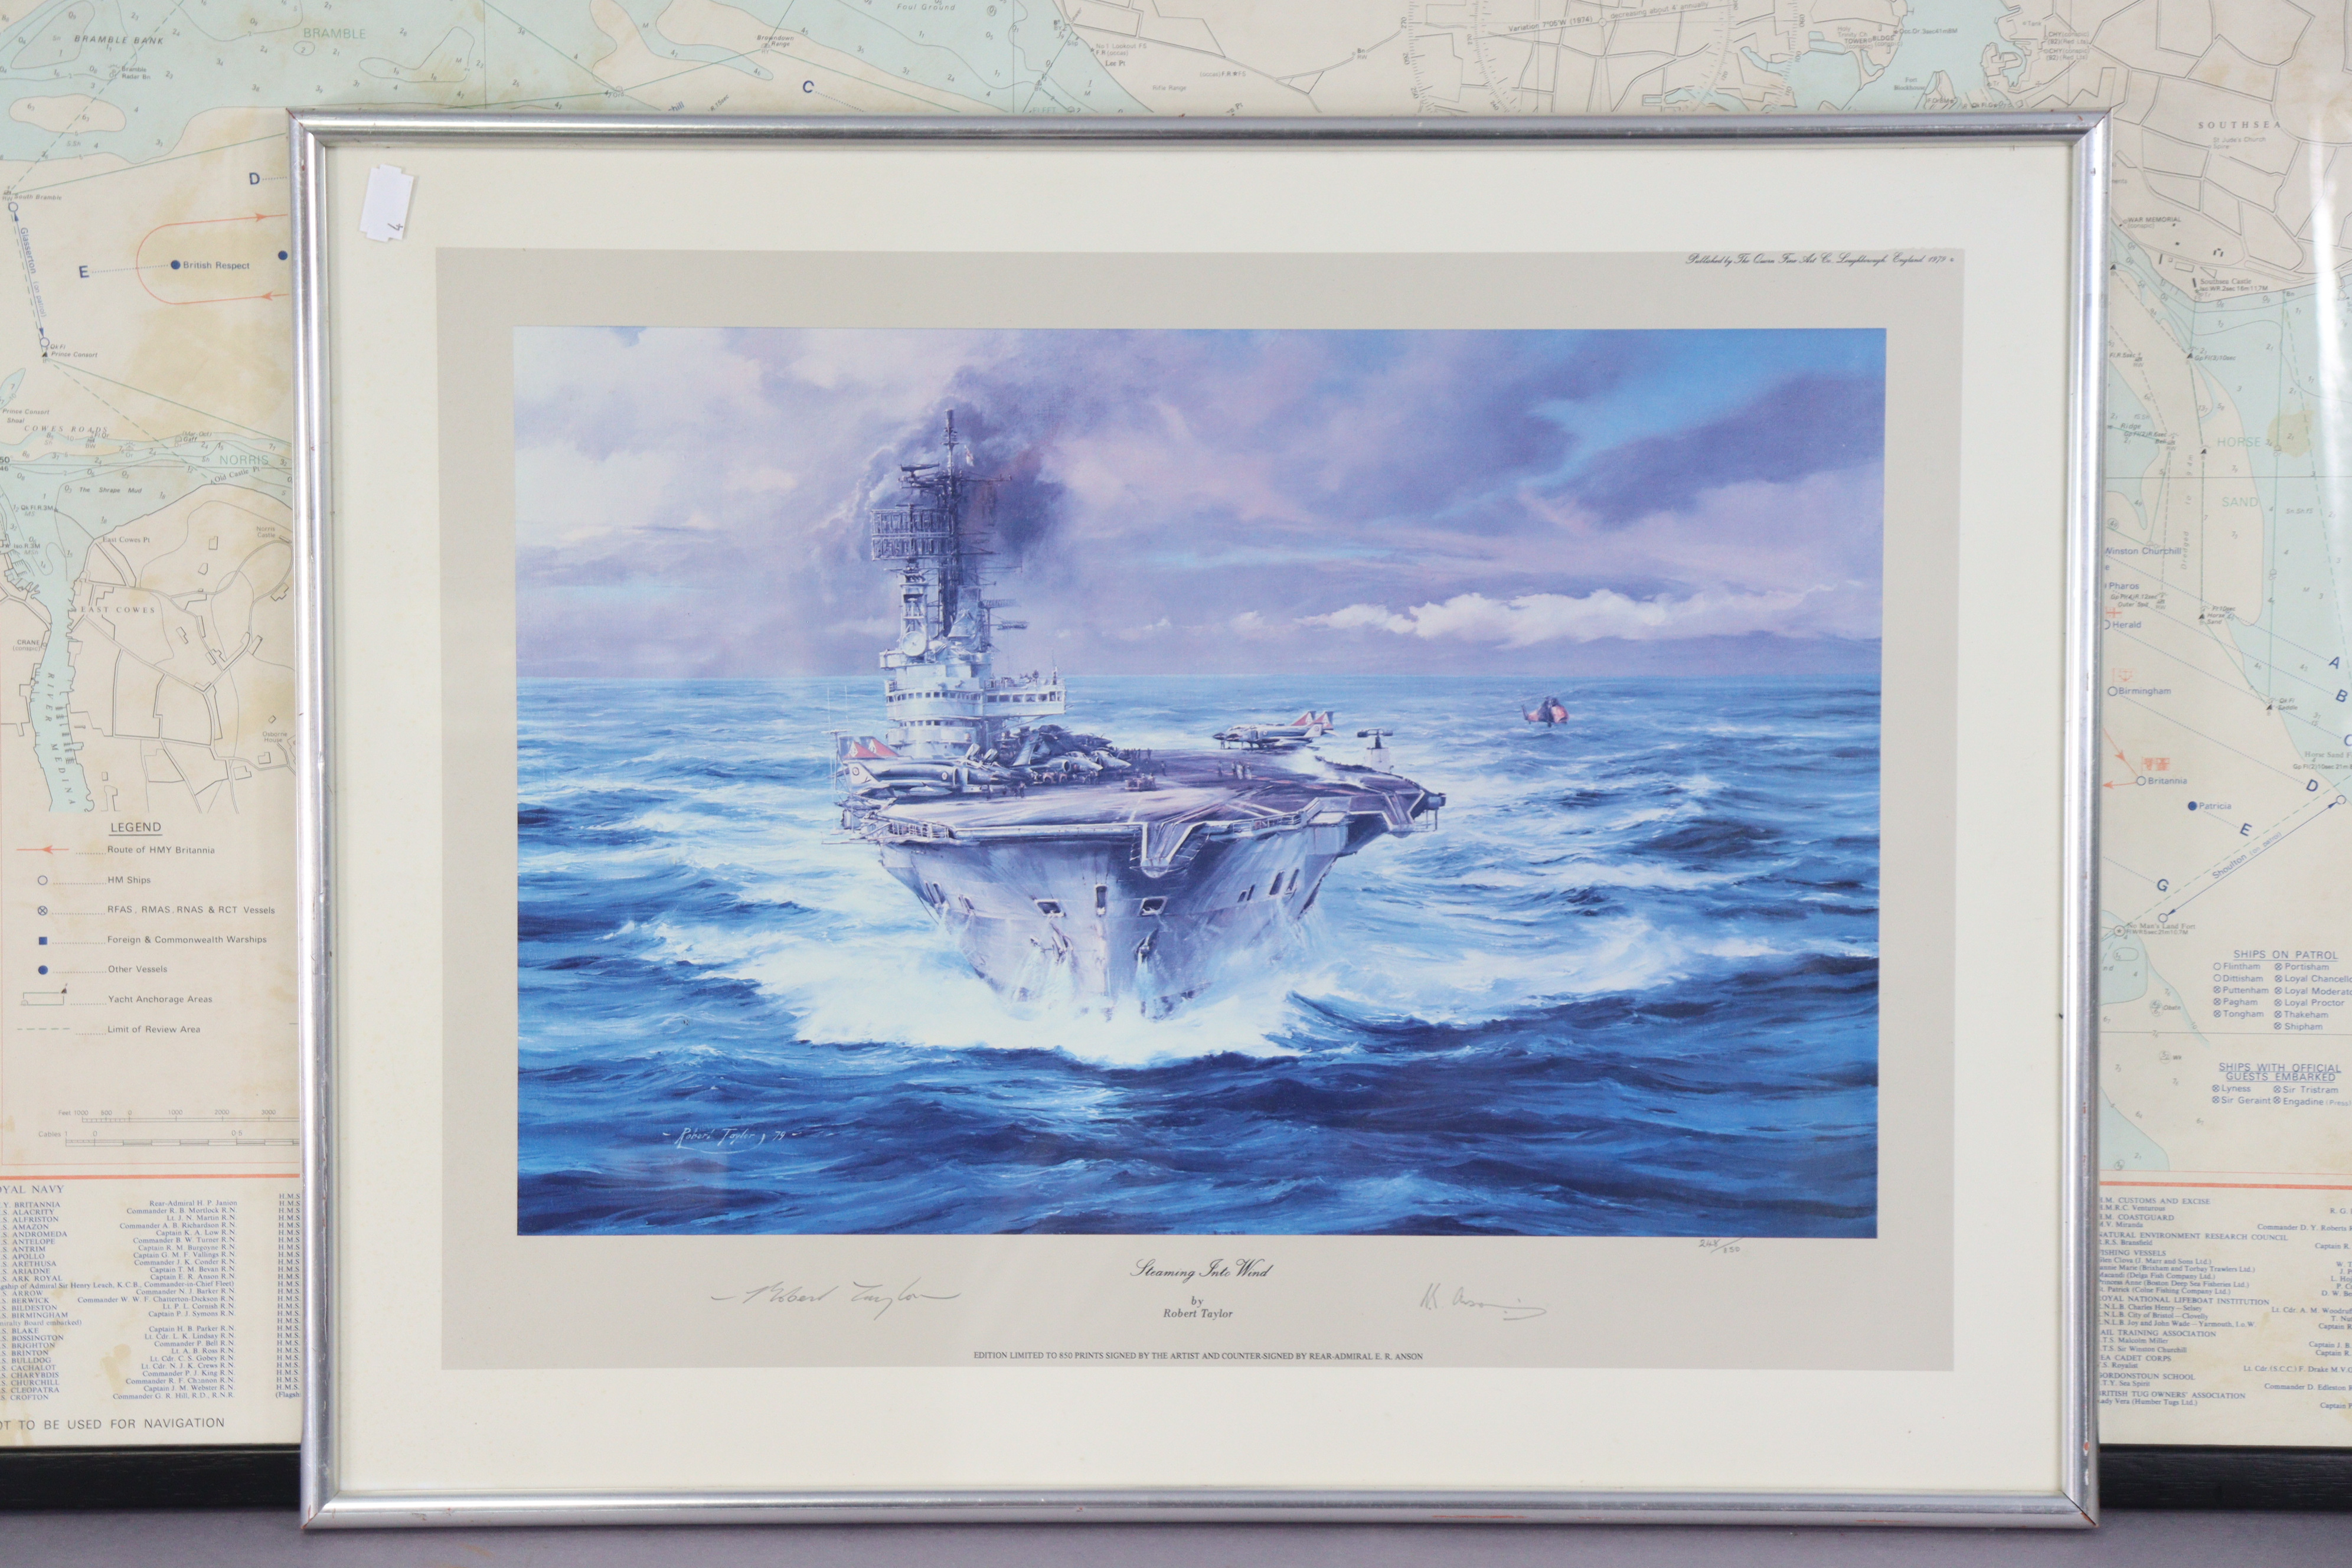 A Limited-Edition coloured print after Robert Taylor titled “Steaming Into Wind” (Ltd. ed. no. 248/